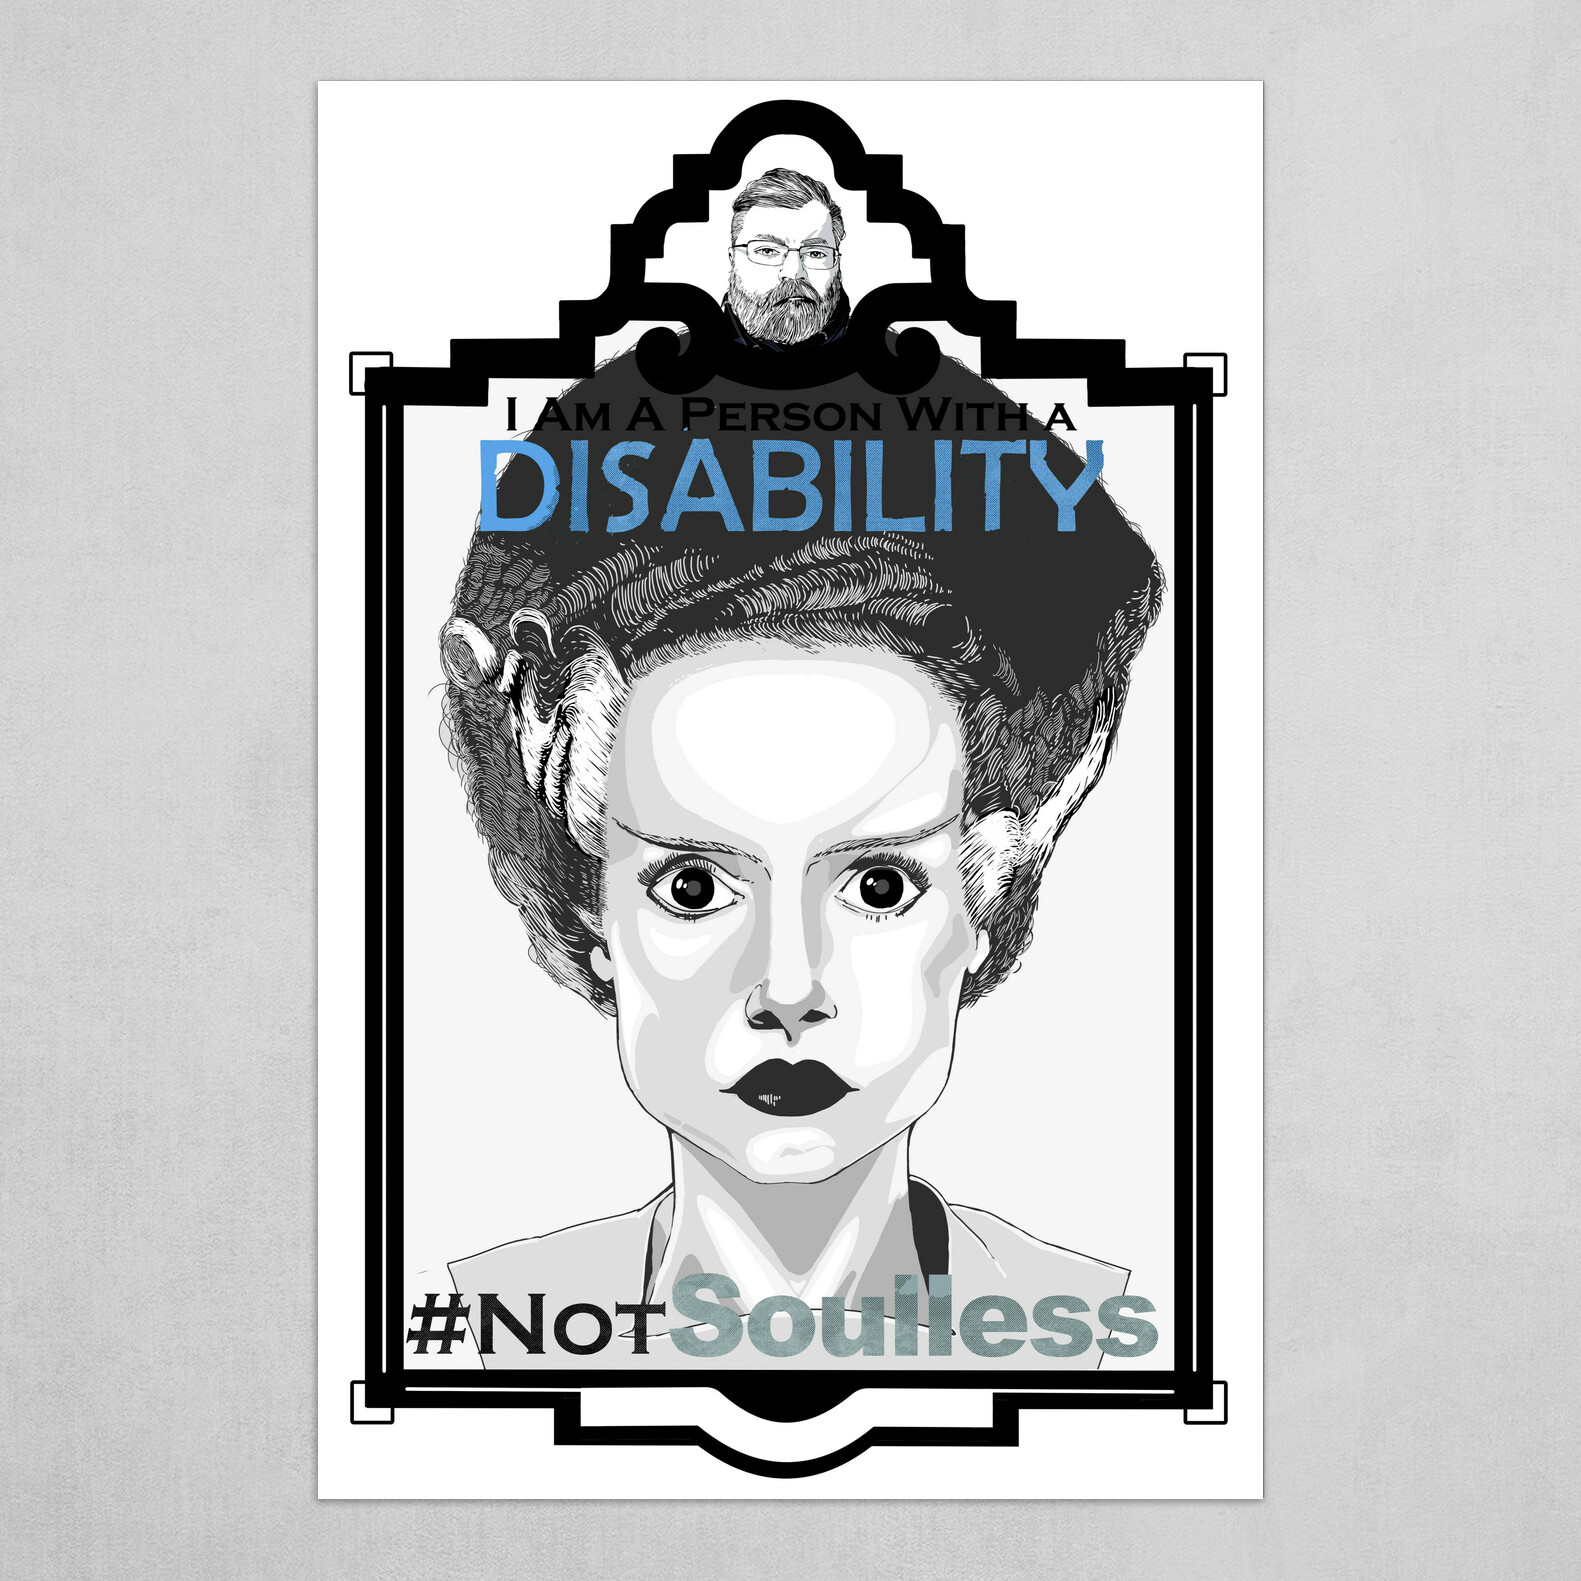 I am a person with a Disability #NotSoulless